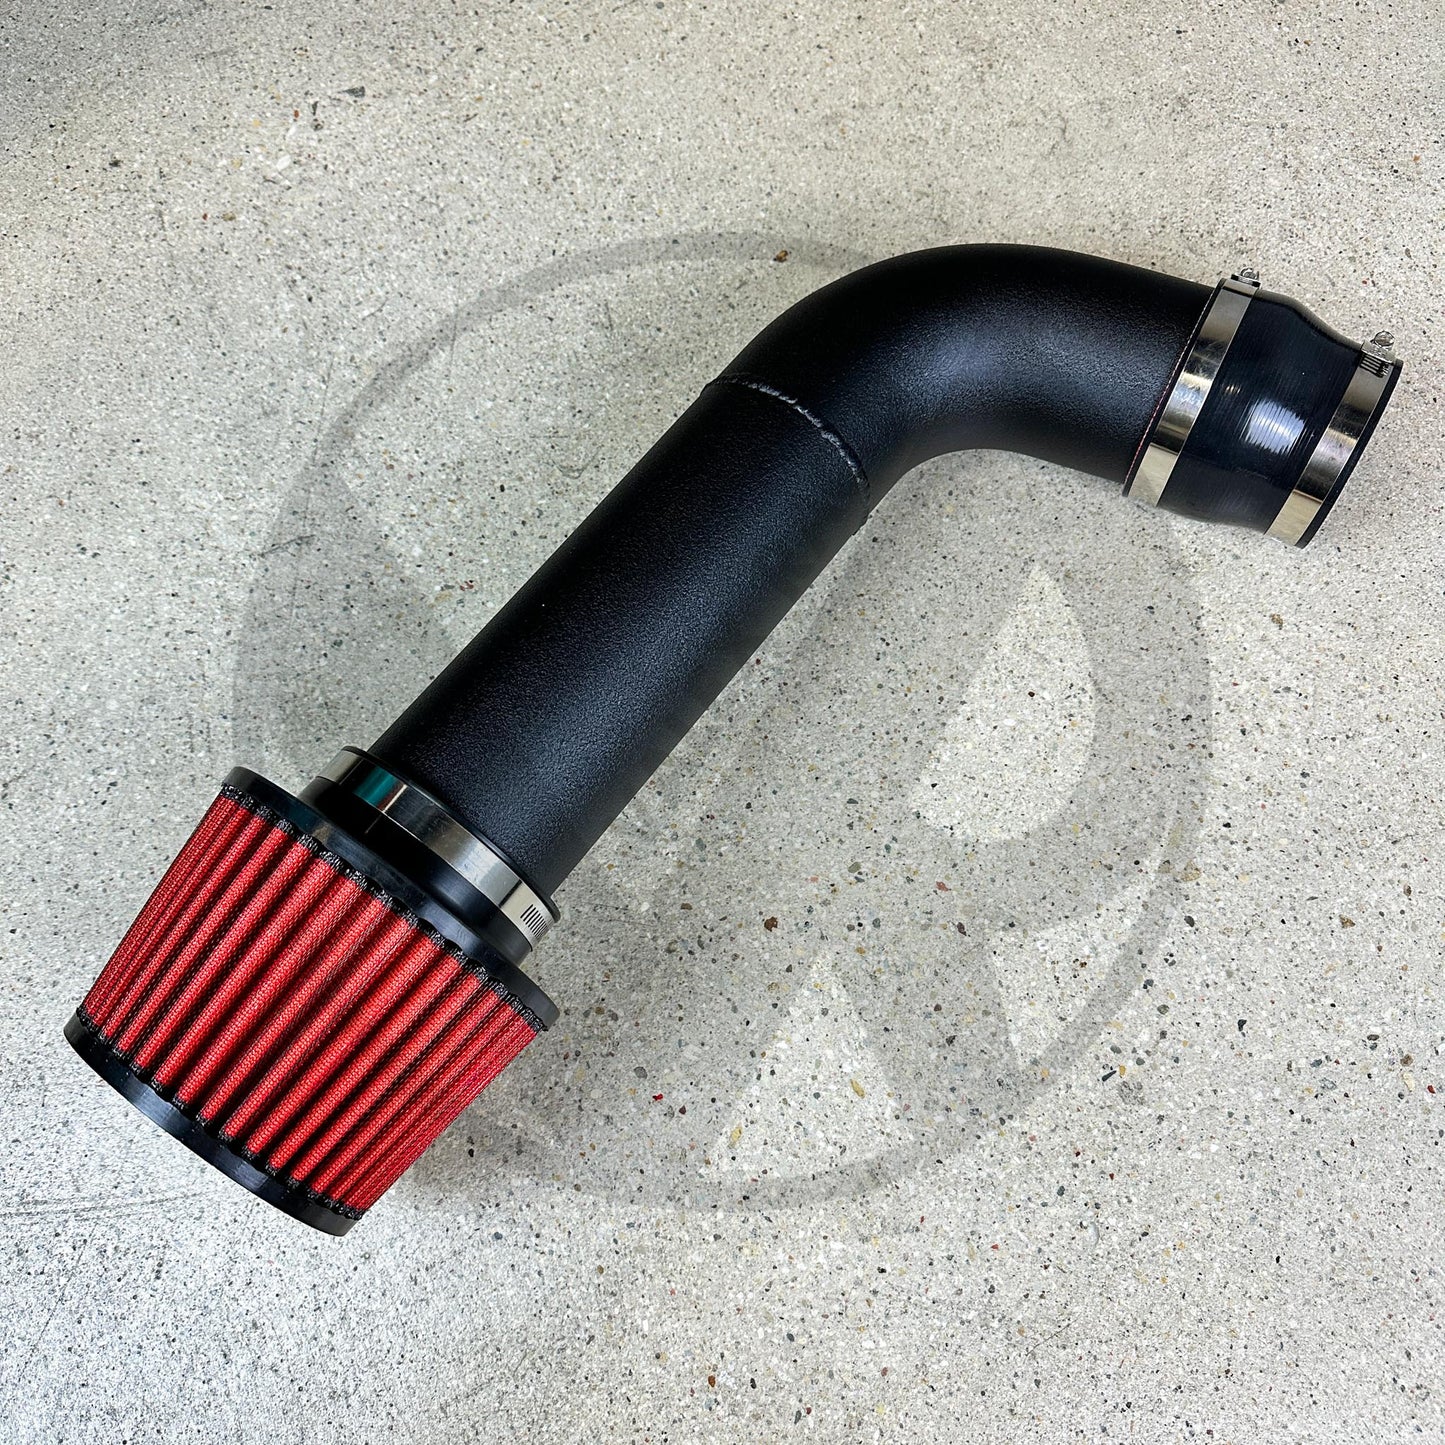 Honda/Acura 3.5" Intake System with K-Tuned Racing Air Filter Black